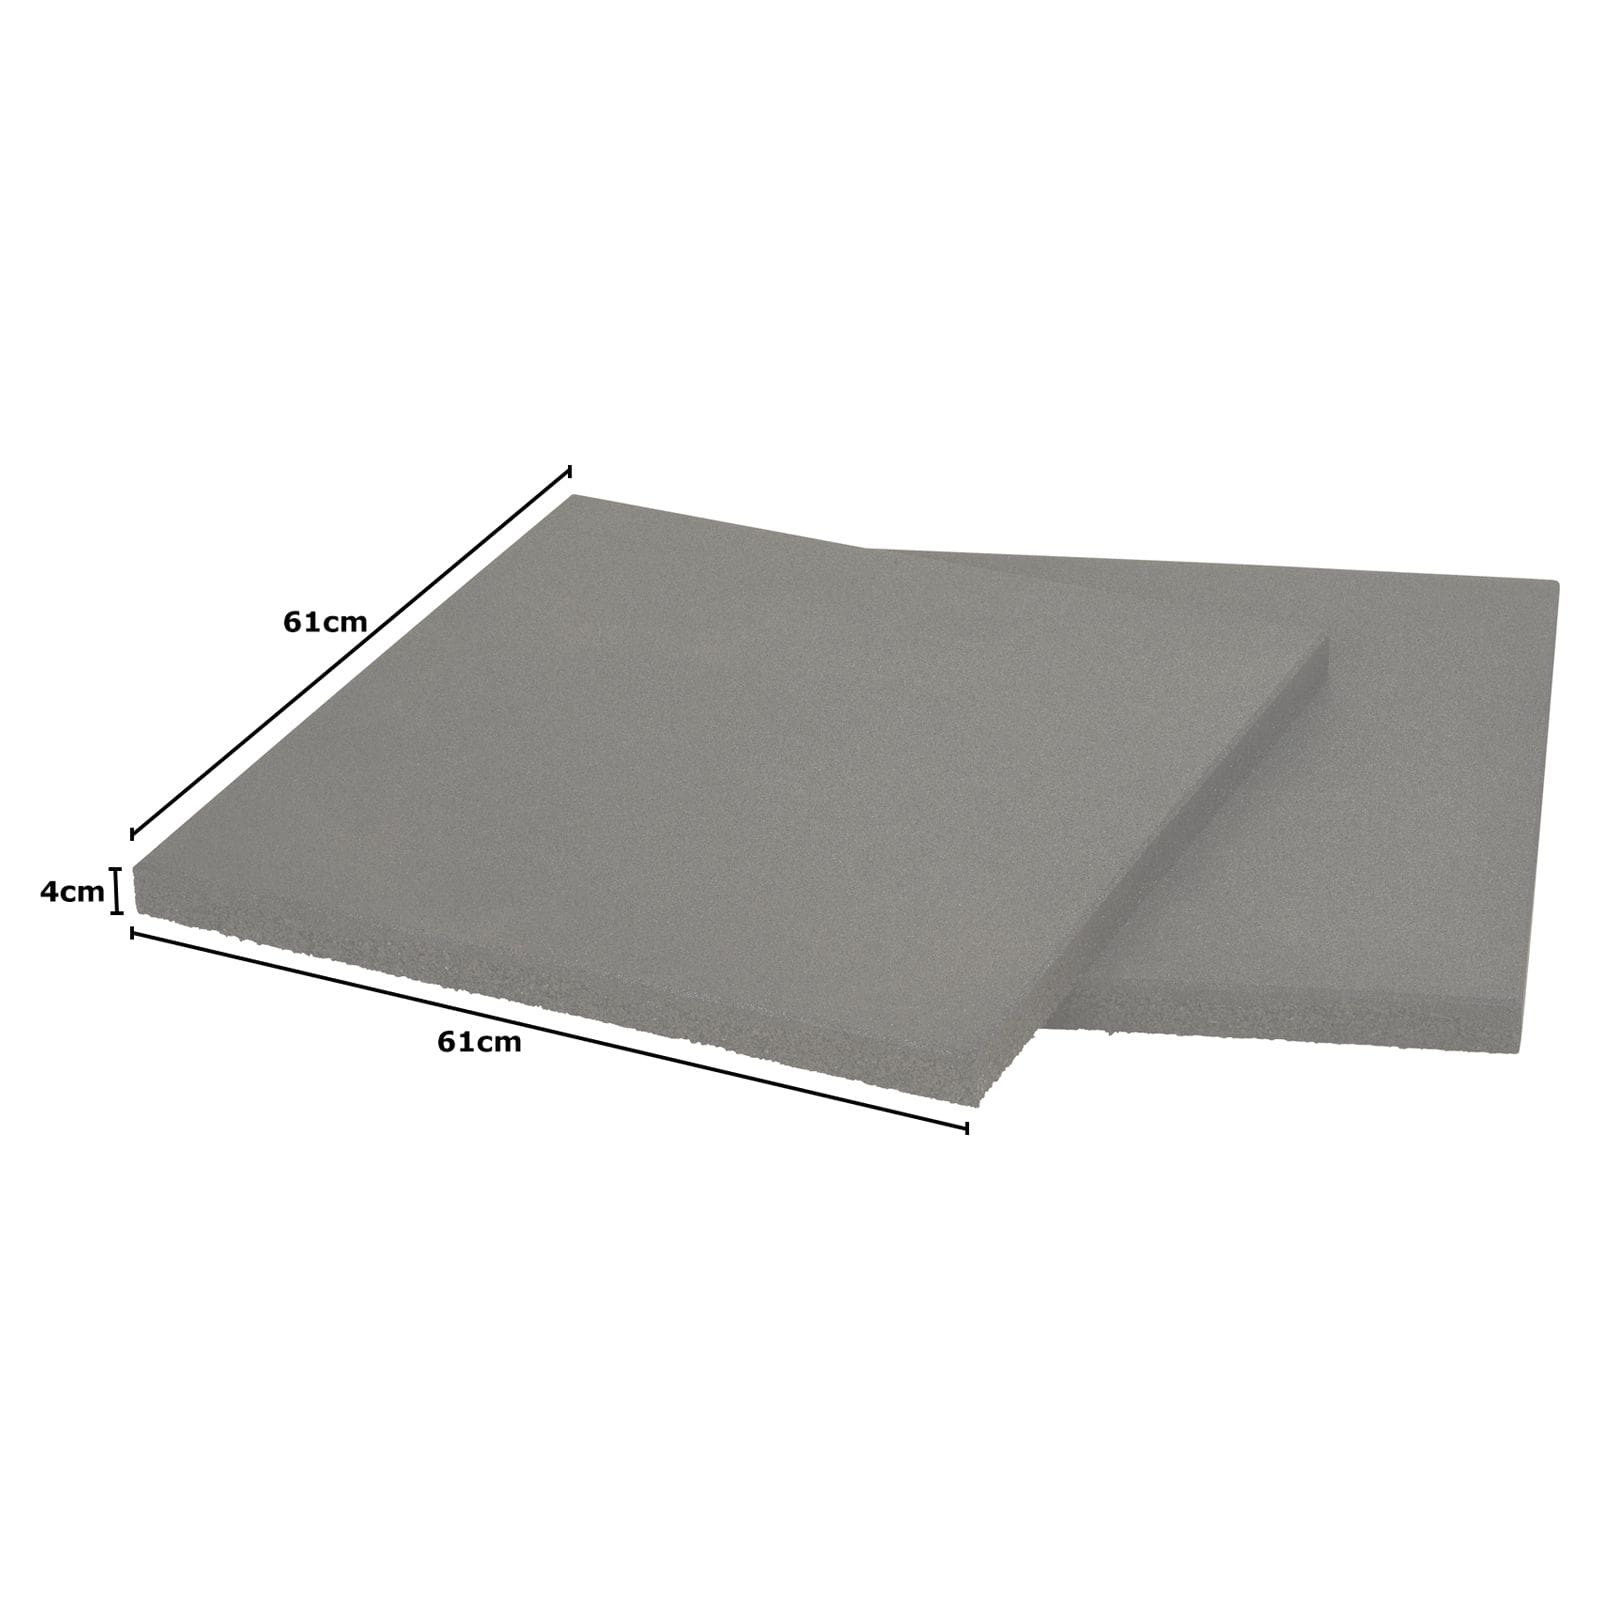 Mirafit 40mm Thick Rubber Gym Flooring Mats Dimensions